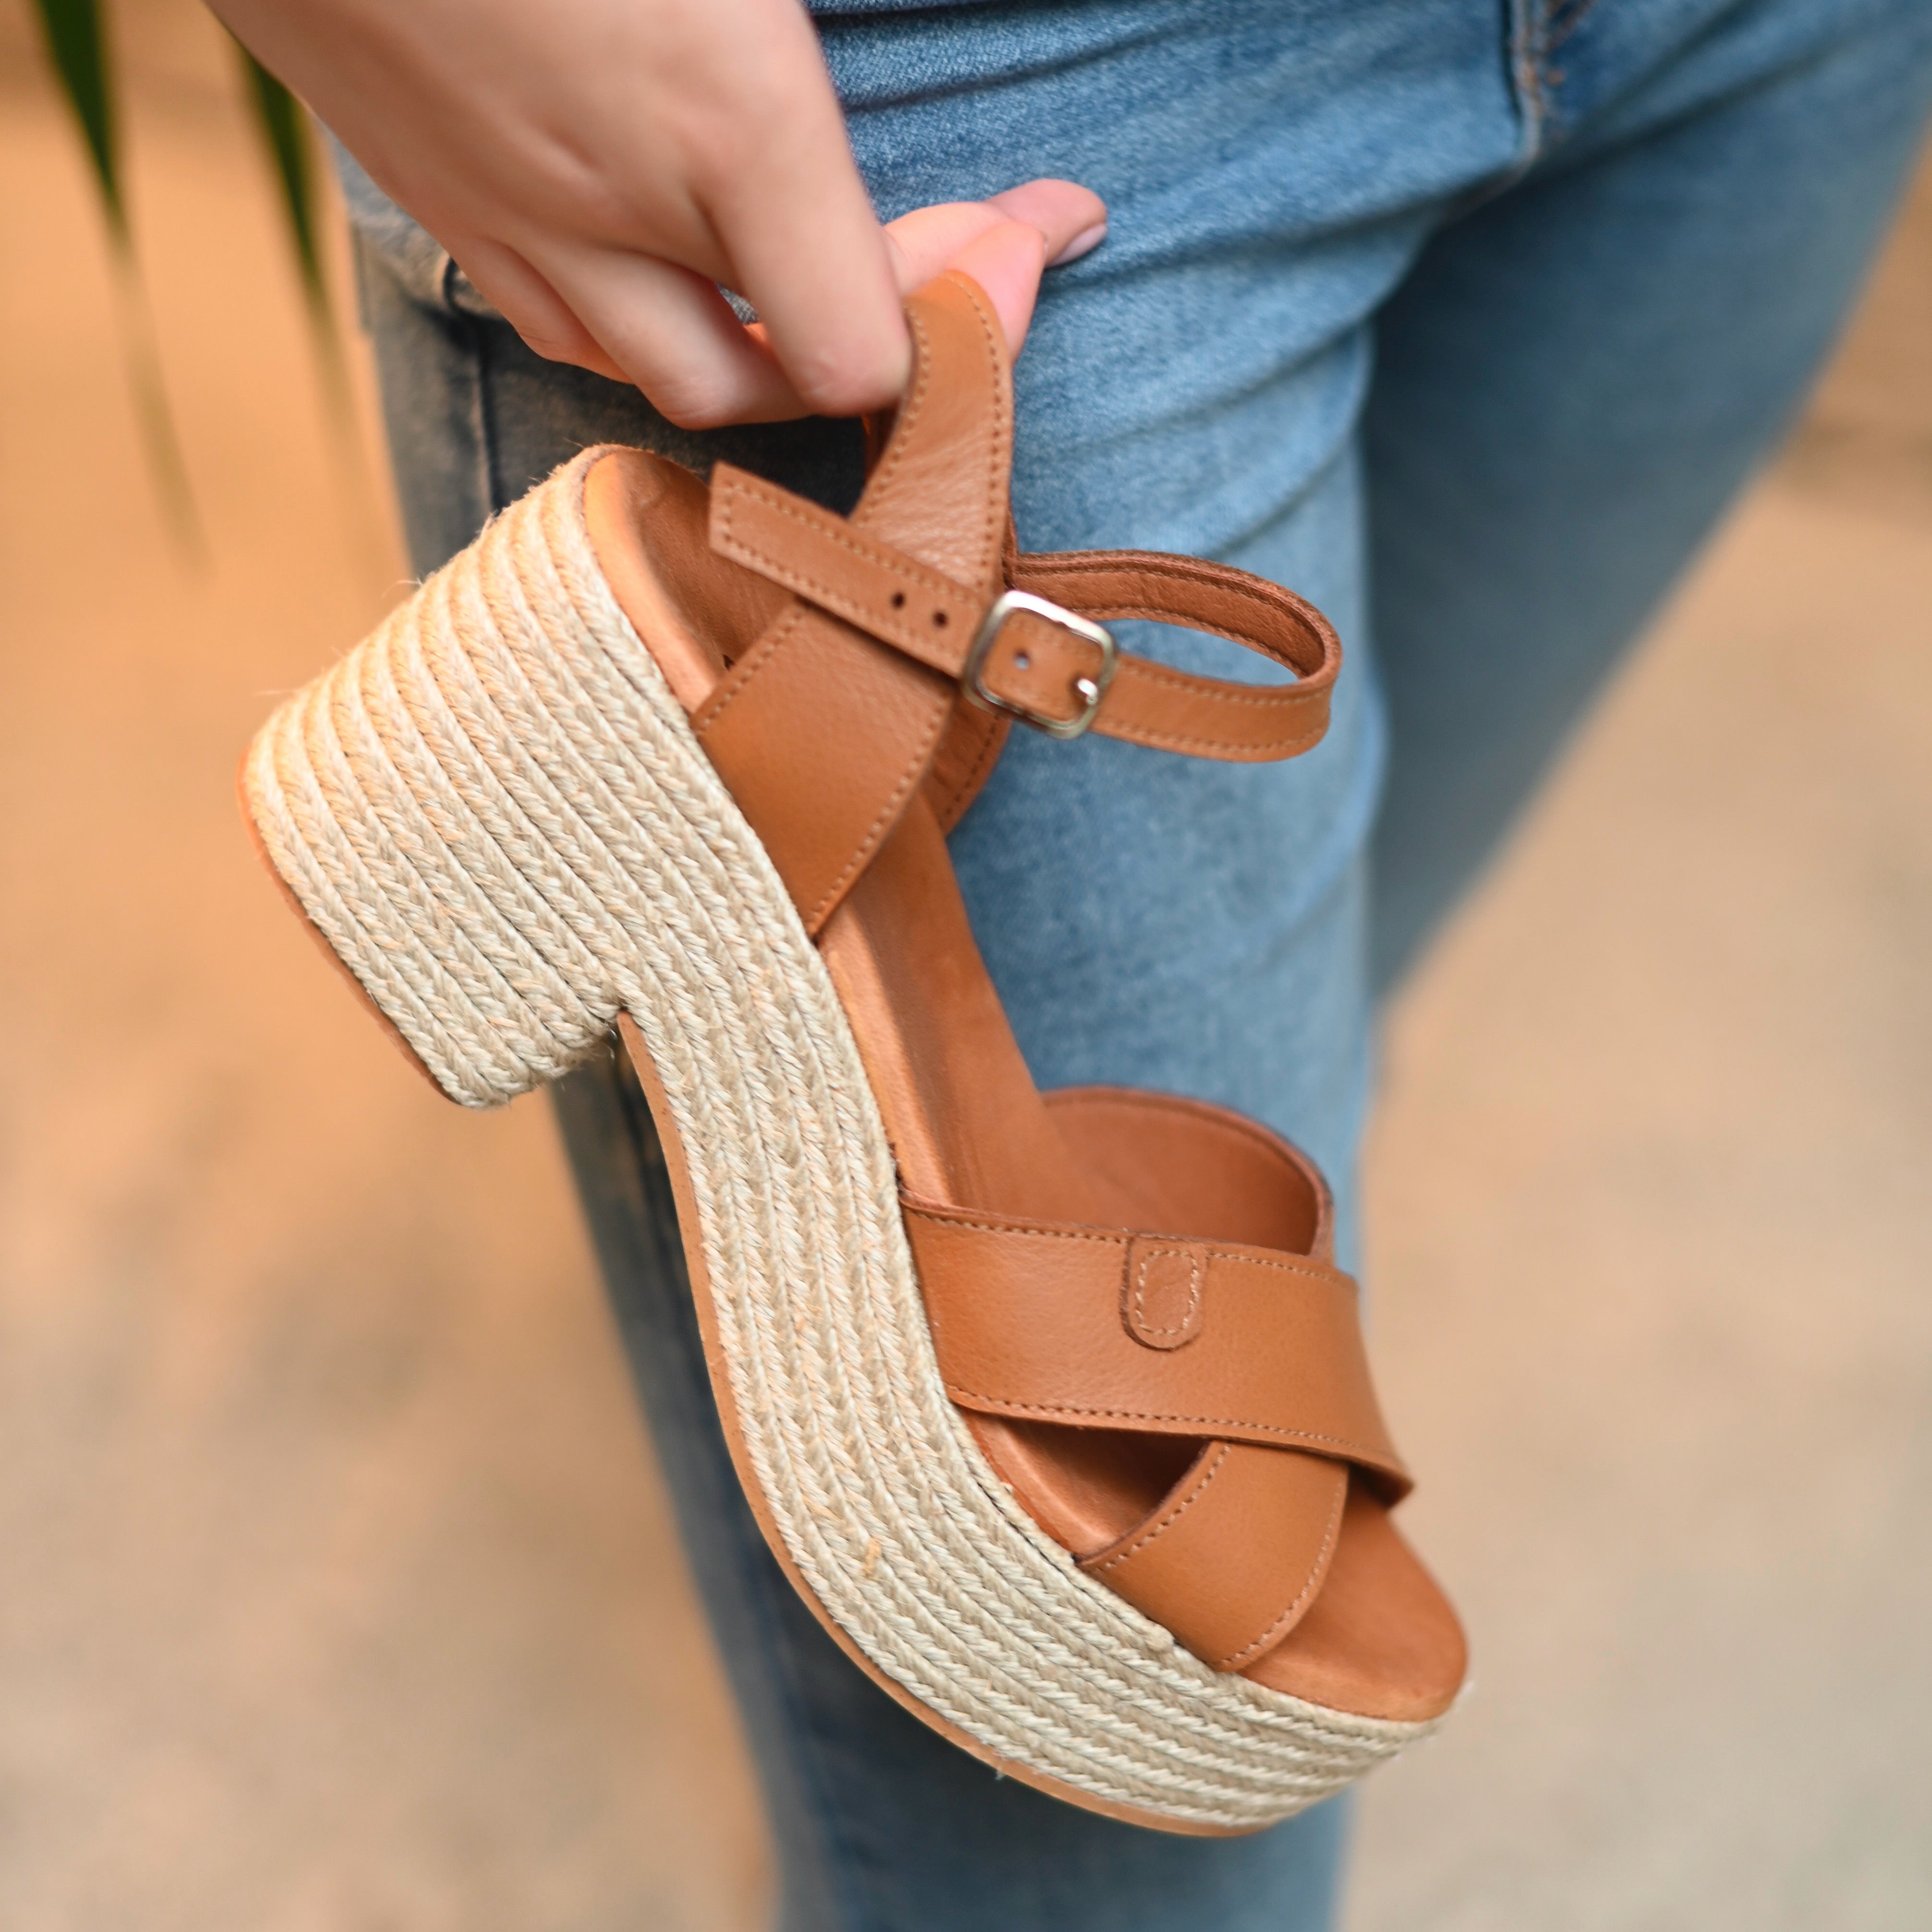 zoom in on a wedge sandals in a saddle color with a block heel